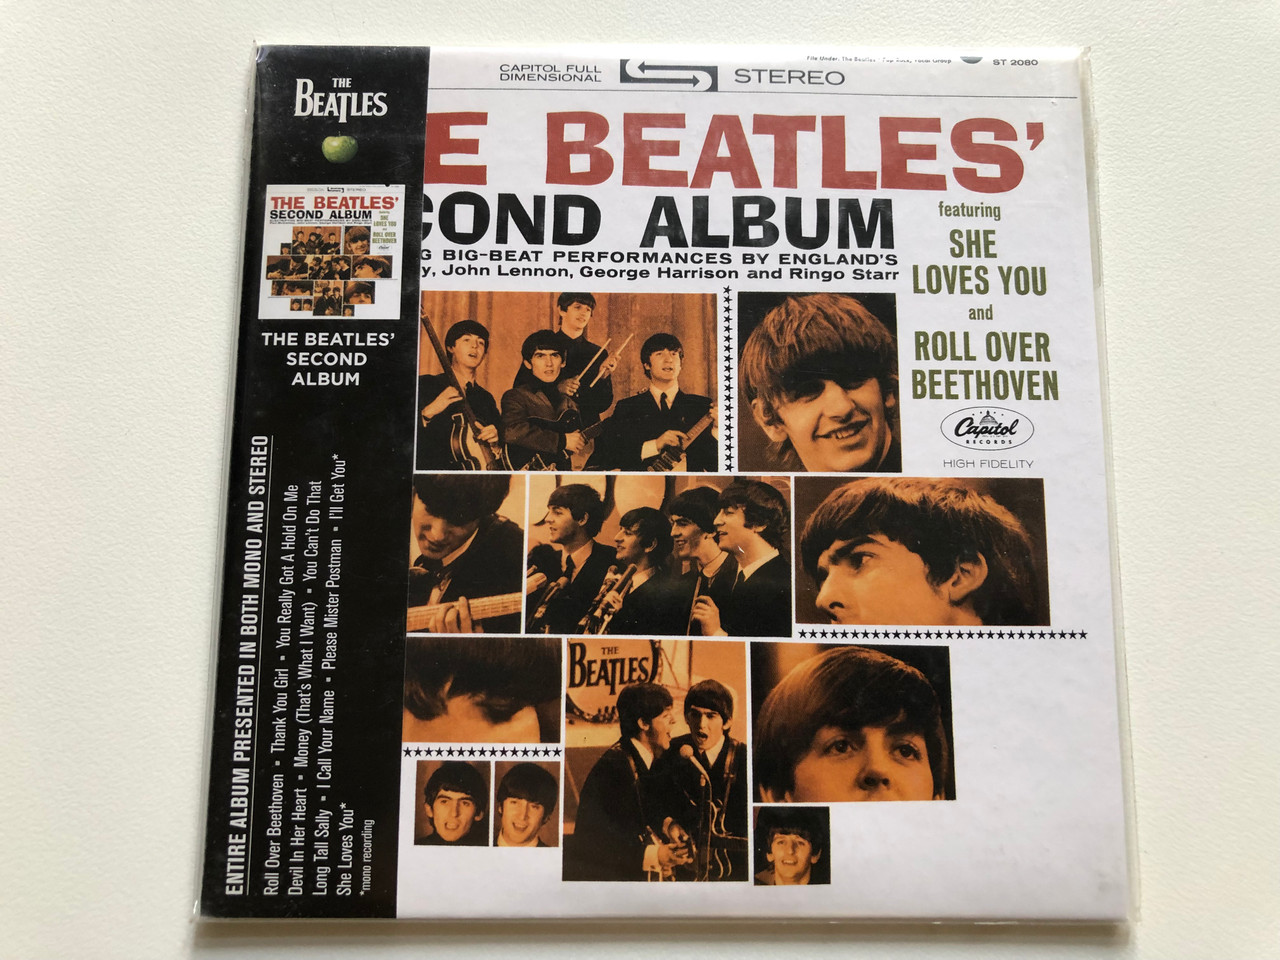 https://cdn10.bigcommerce.com/s-62bdpkt7pb/products/0/images/245398/The_Beatles_Second_Album_Featuring_She_Loves_You_And_Roll_Over_Beethoven_Entire_Album_Presented_In_Both_Mono_And_Stereo_Roll_Over_Beethoven_Thank_You_Girl_You_Really_Got_A_Hold_On_1__75122.1659545487.1280.1280.JPG?c=2&_gl=1*1jksiwi*_ga*MjA2NTIxMjE2MC4xNTkwNTEyNTMy*_ga_WS2VZYPC6G*MTY1OTU0MTQzMS41MTIuMS4xNjU5NTQ1MTk0LjYw